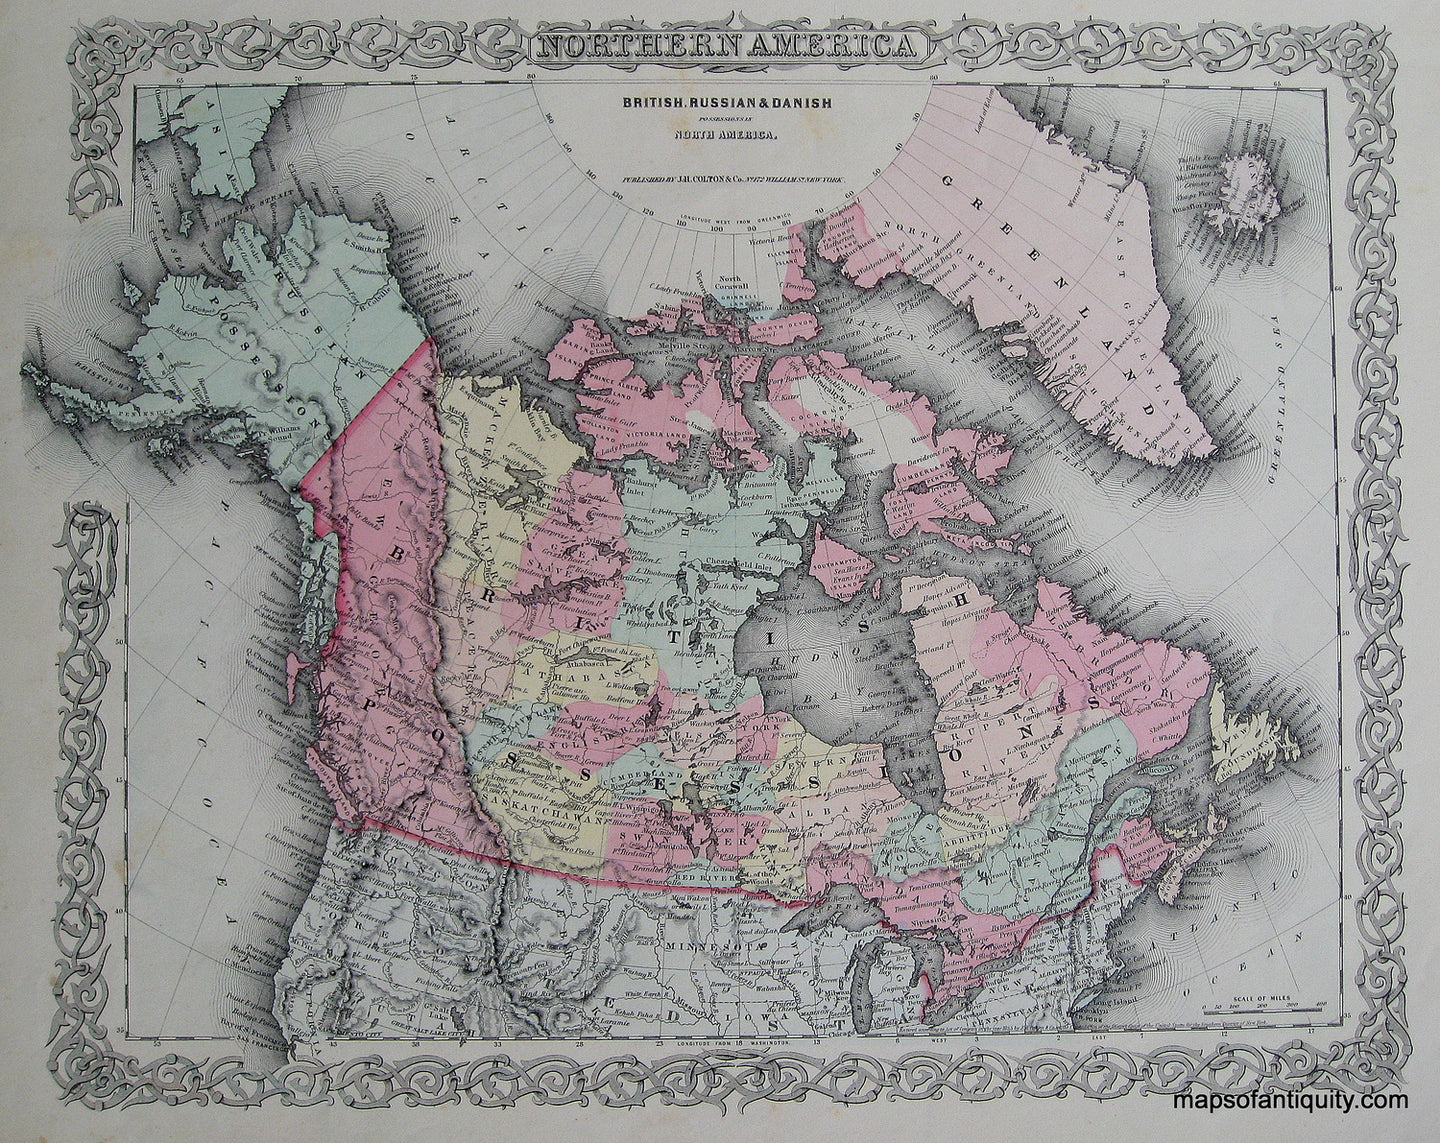 Antique-Hand-Colored-Map-Northern-America-British-Russian-and-Danish-Possessions-in-North-America-Canada--1855-Colton-Maps-Of-Antiquity